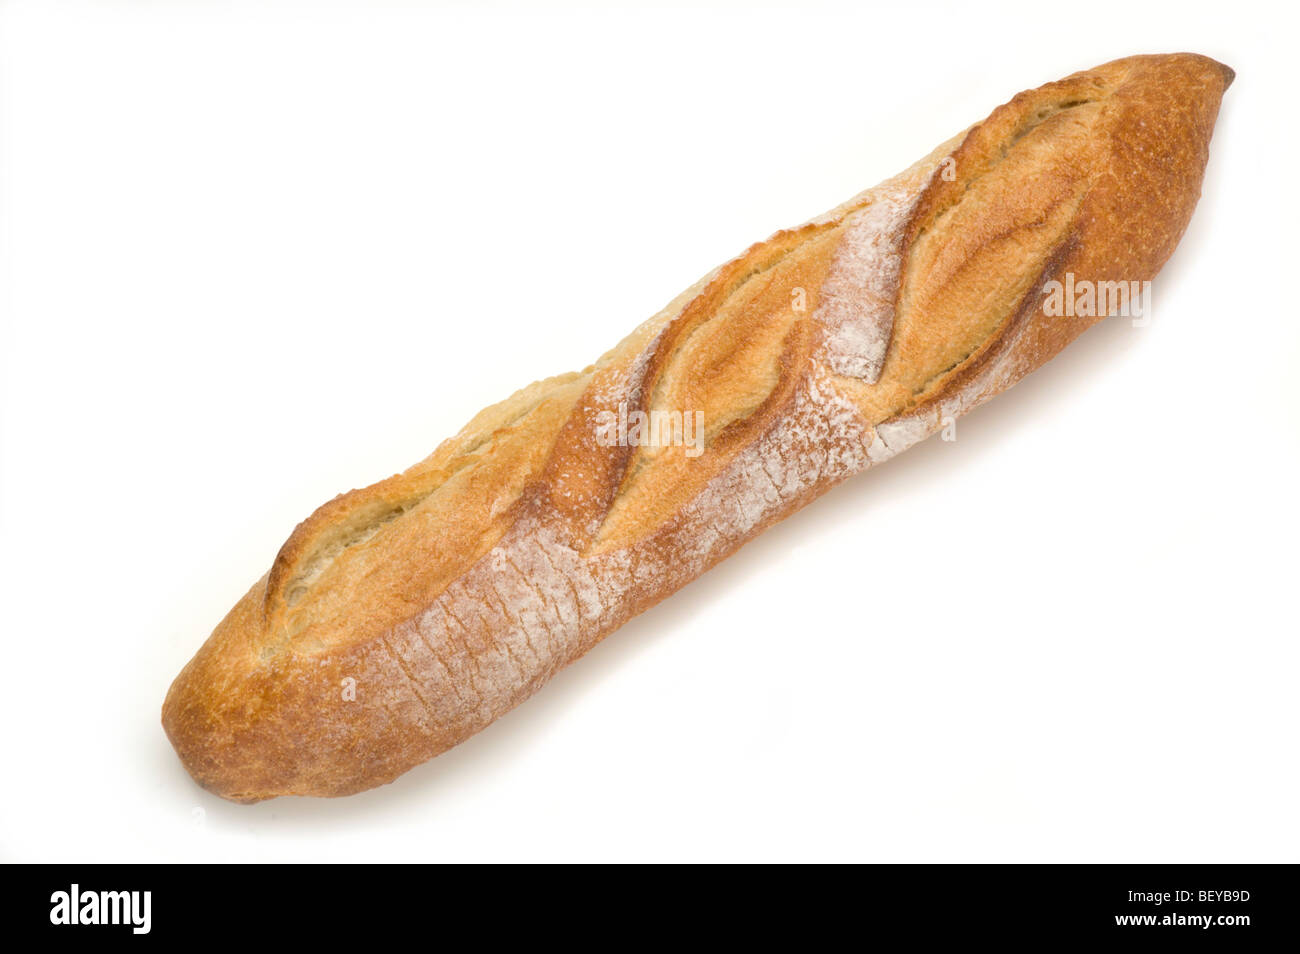 Fresh baked loaf of Italian bread on white Stock Photo